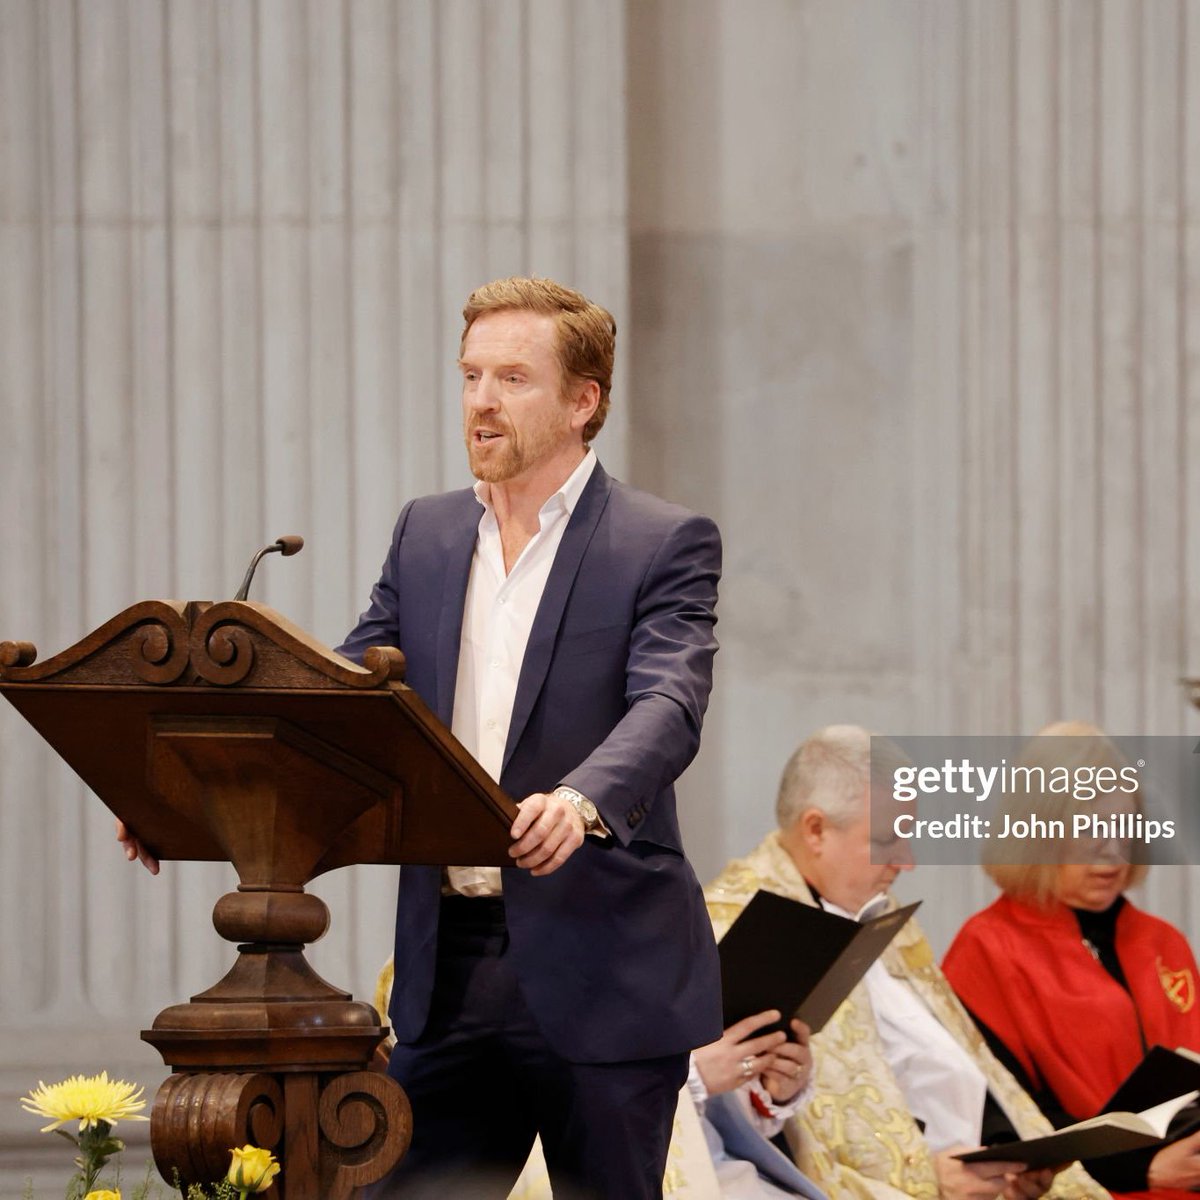 'I am the master of my fate, I am the captain of my soul.' #DamianLewis recites #InvictusPoem by #WilliamErnestHenley at #InvictusGames Foundation's 10th anniversary ceremony. Get event details and see photos here: damian-lewis.com/?p=53723 #PrinceHarry #WeAreInvictus